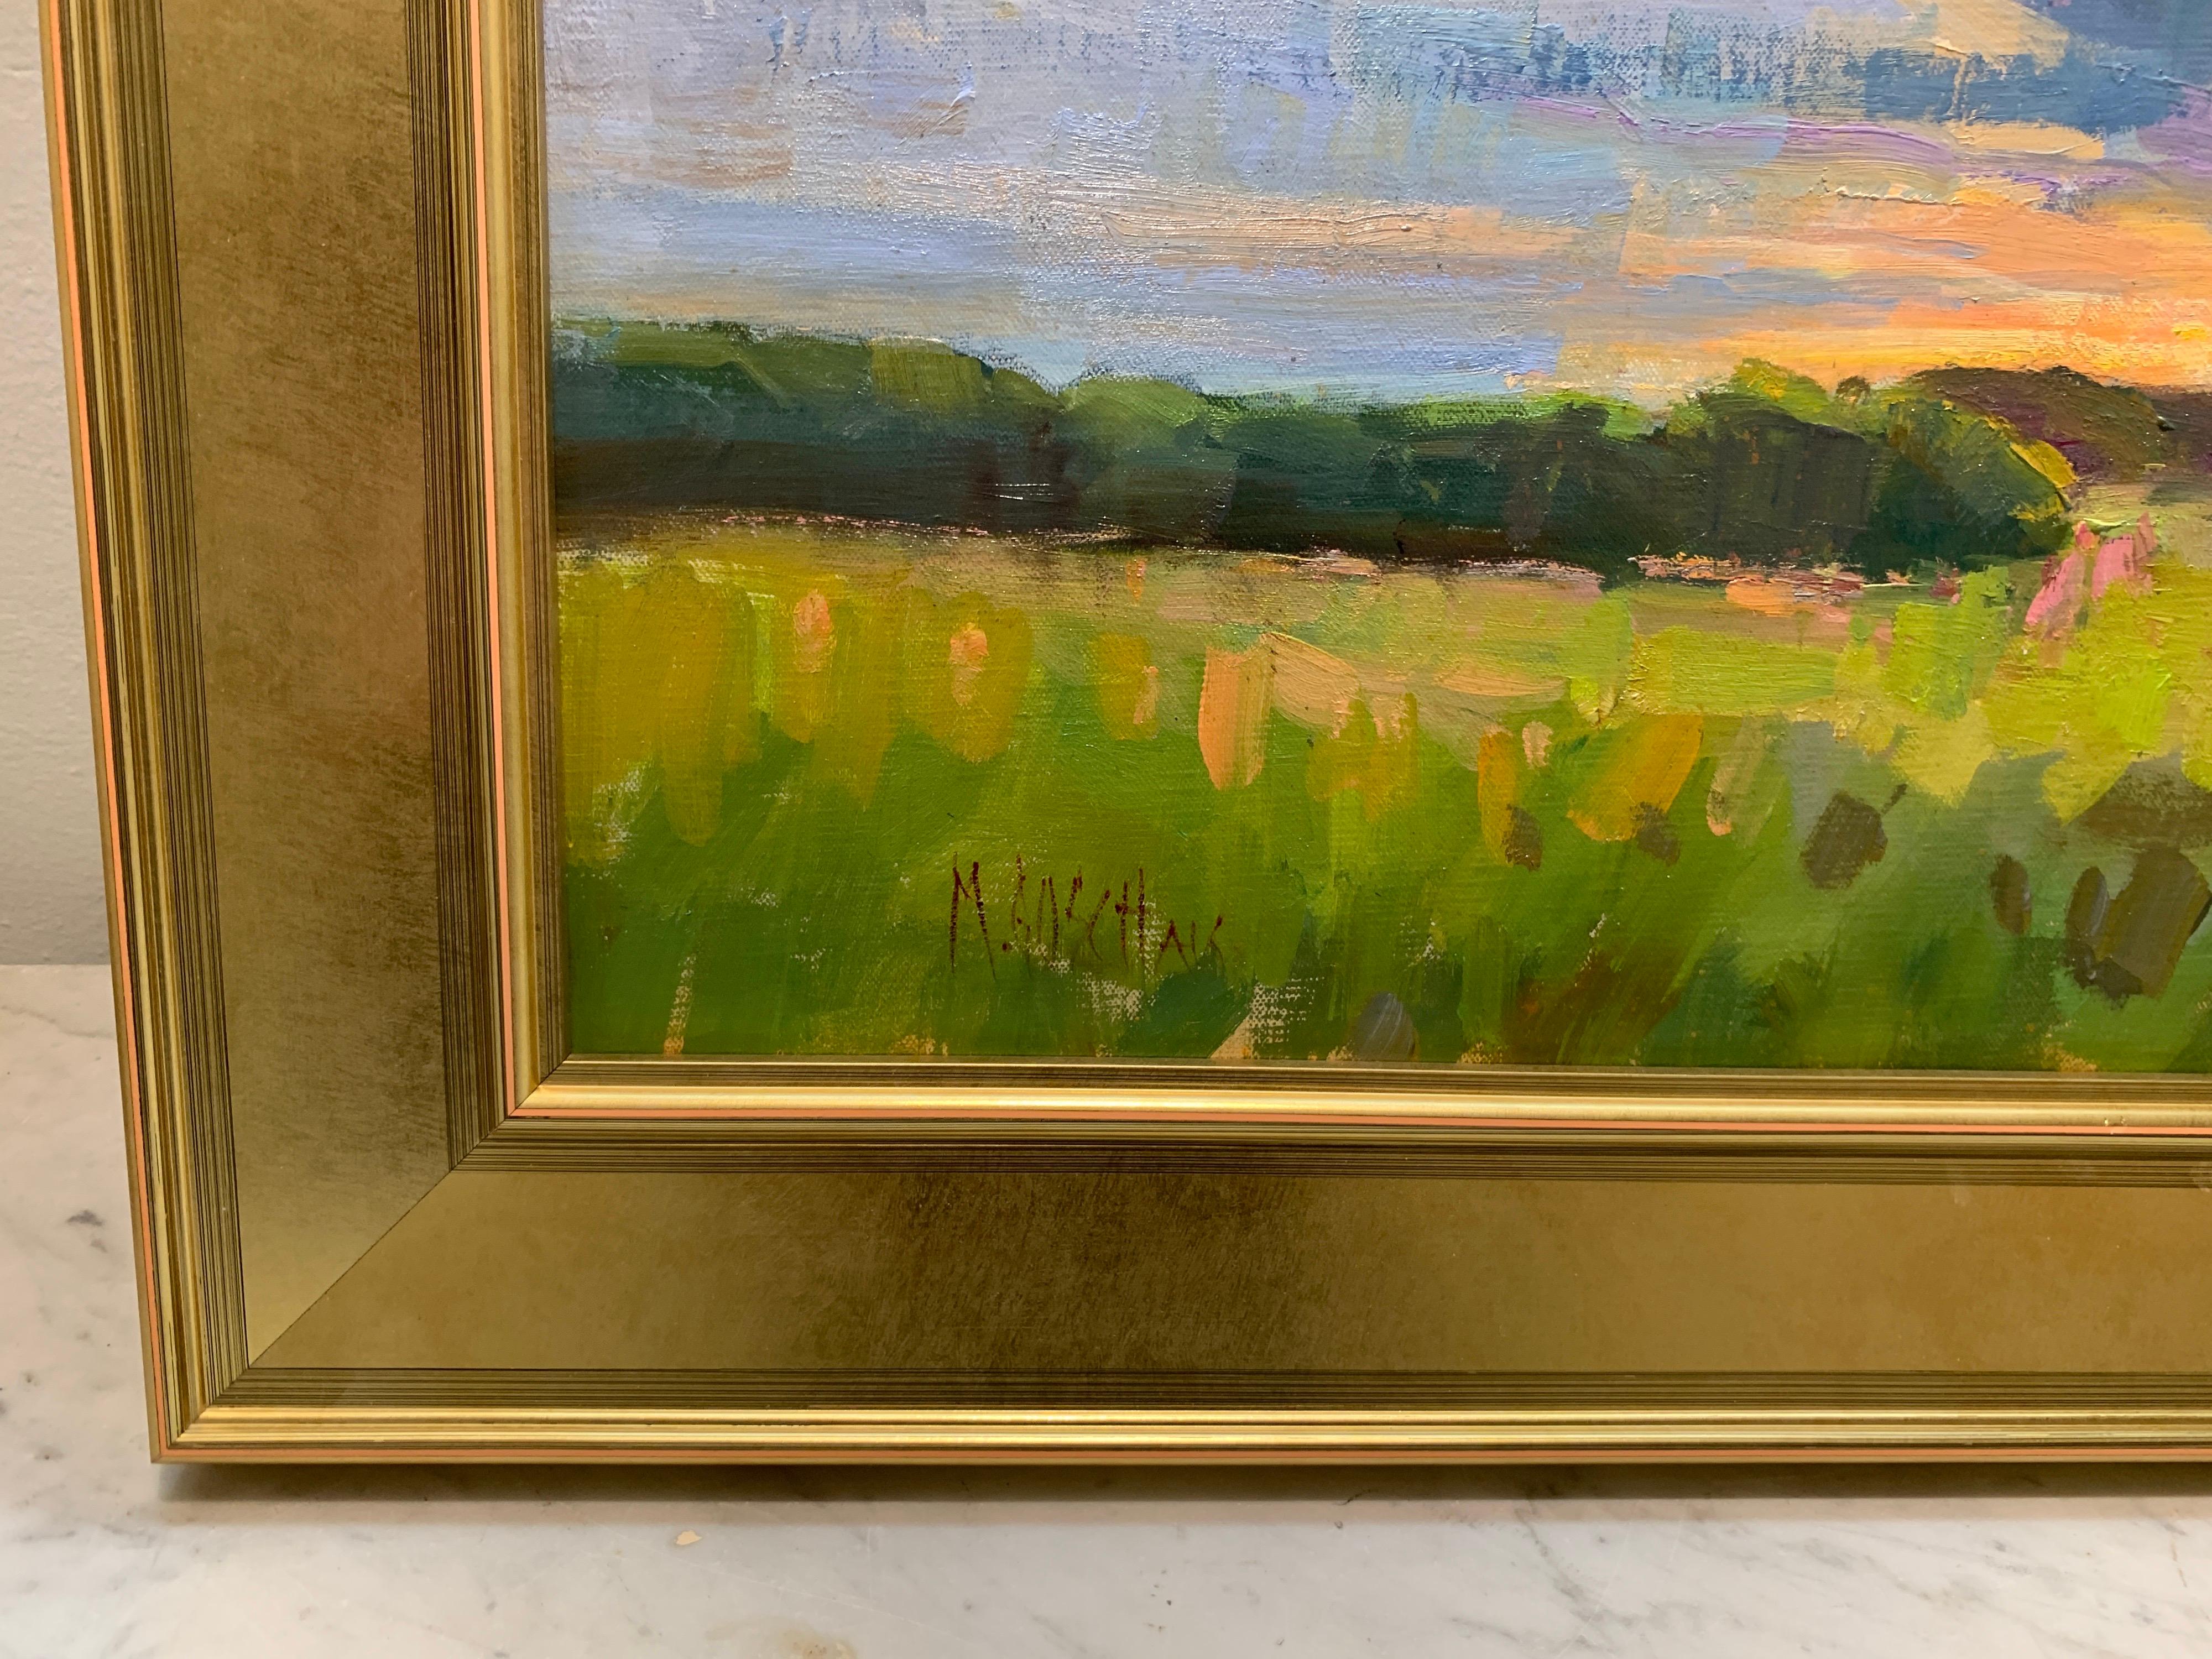 'After A Storm' is a framed Impressionist plein air landscape painting created by American artist Millie Gosch in 2021. Featuring a rich palette mostly made of blue, green, pink and orange tones, this oil on canvas painting depicts an exquisite